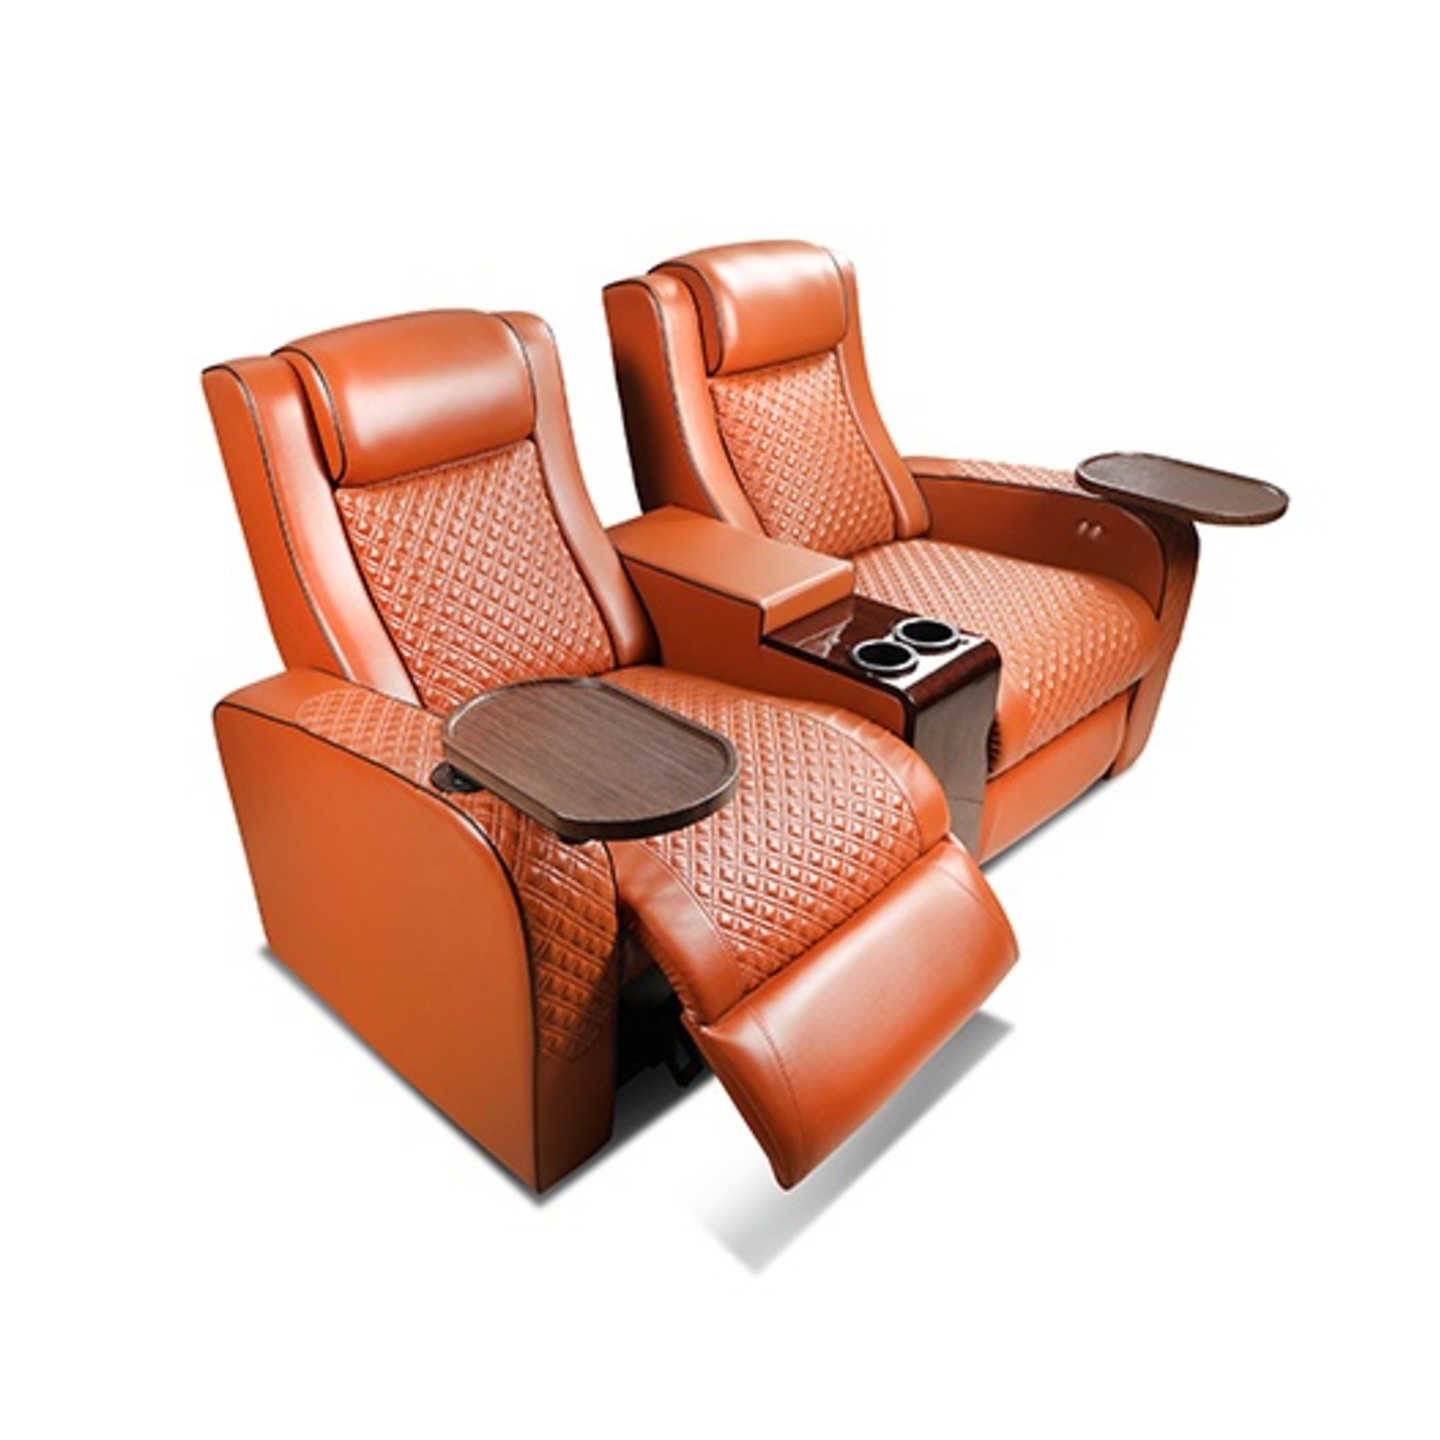 LN Recliner Chair Aderia Electronic System In Brown Colour